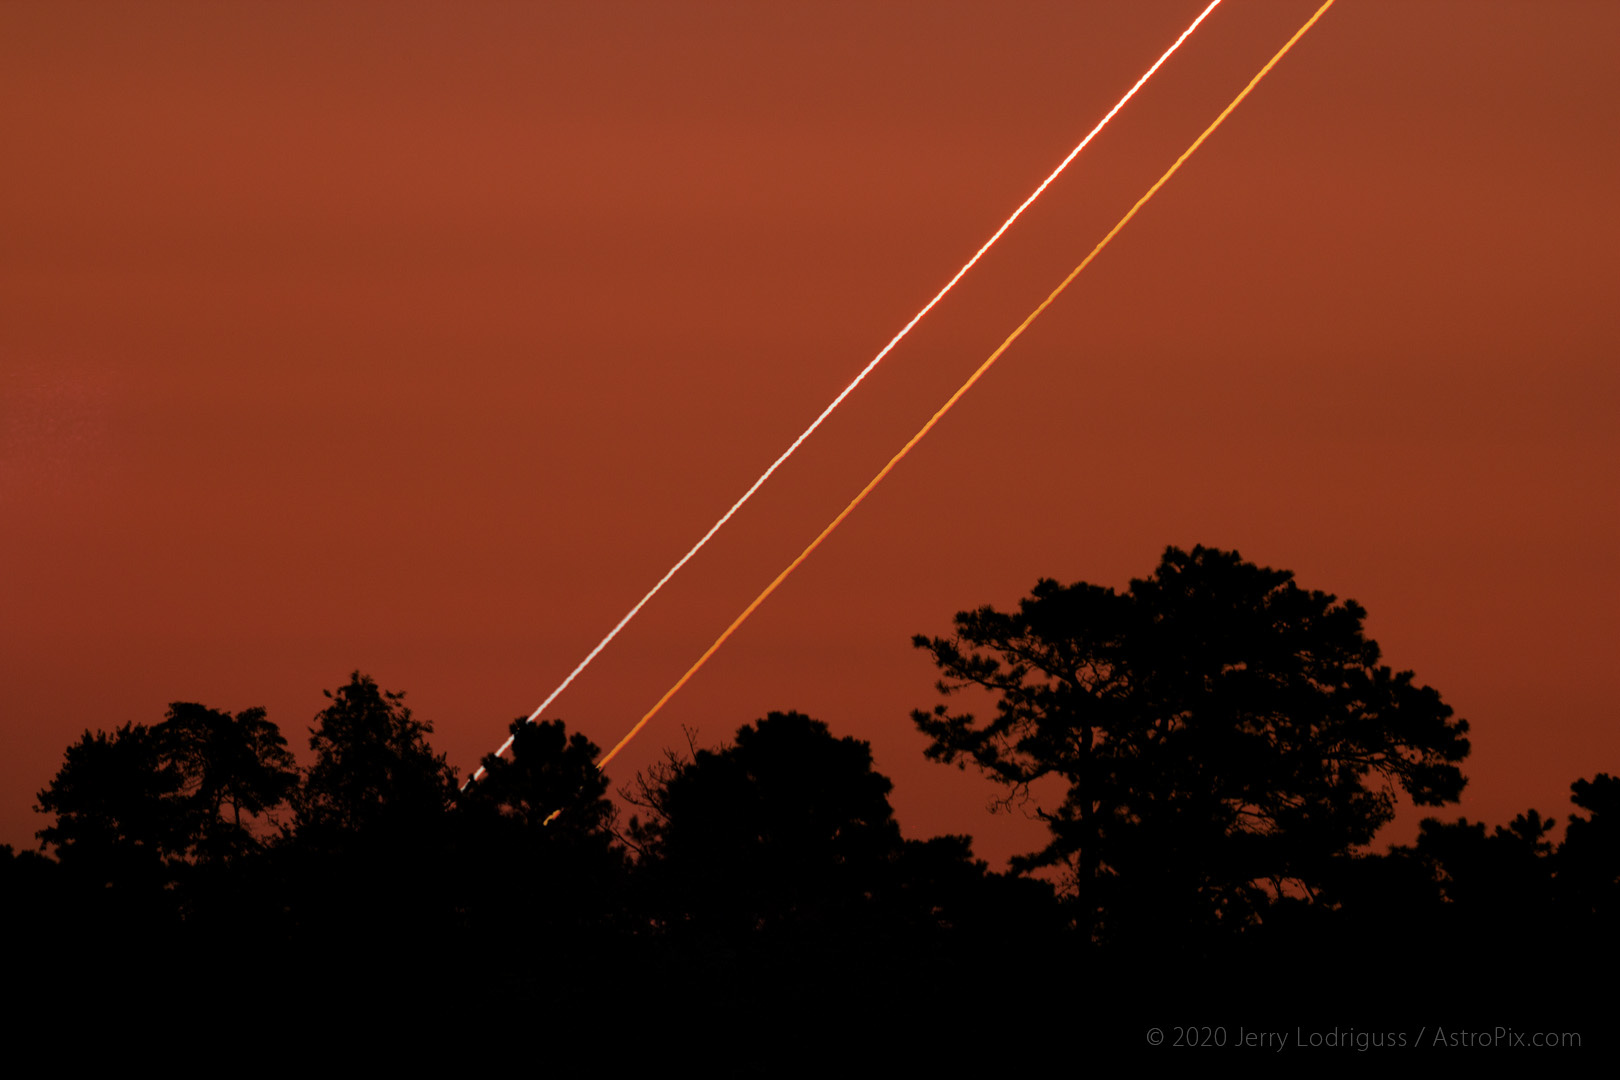 Venus and Jupiter rise in conjunction as the sky reddens from the coming sunrise on August 18, 2014.